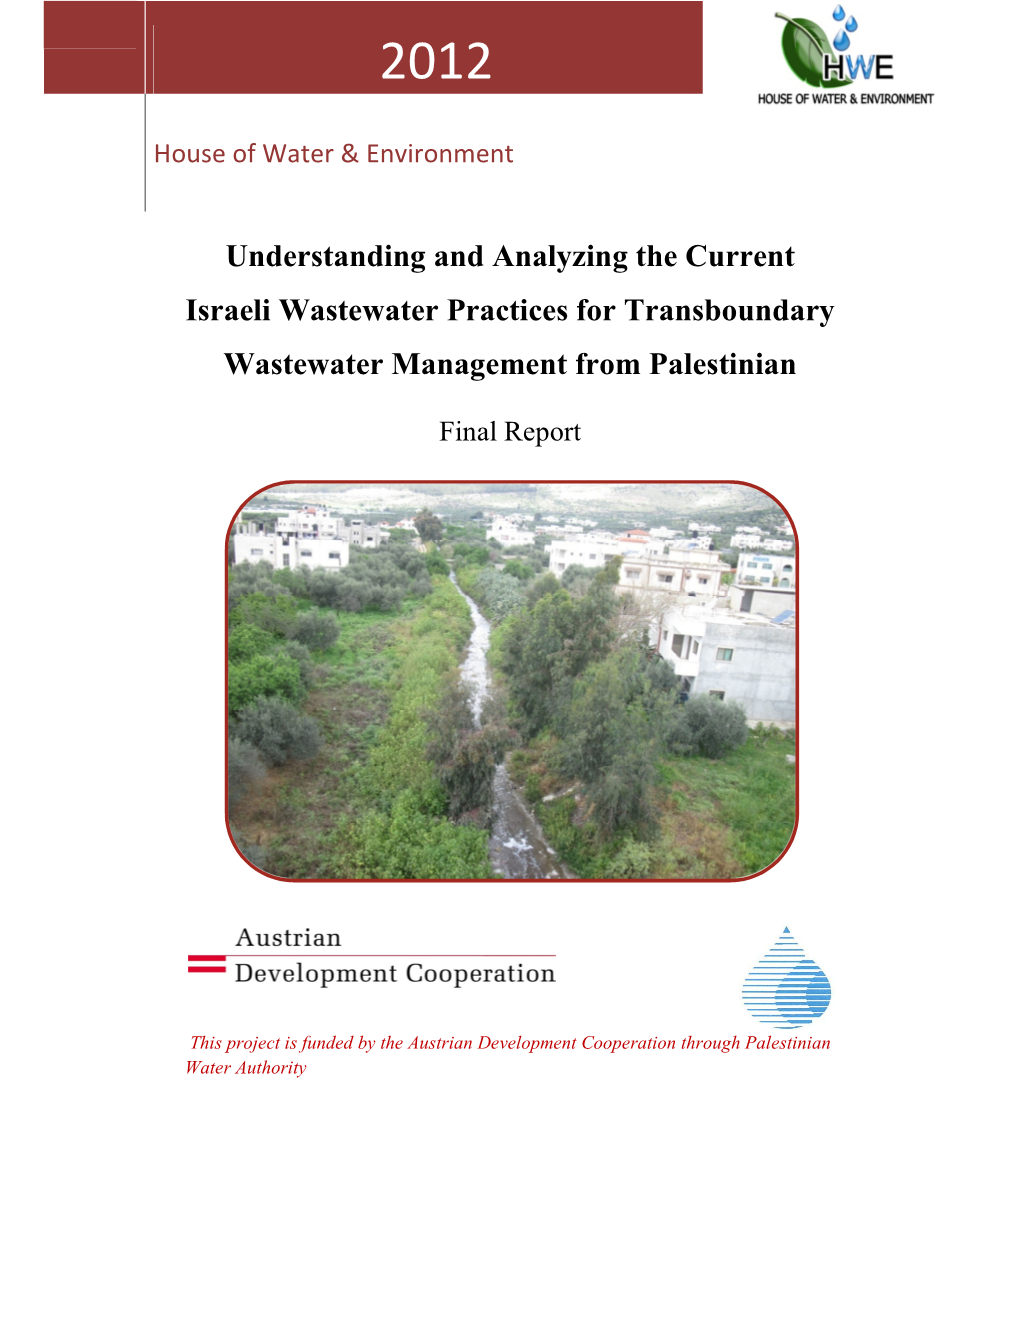 Understanding and Analyzing the Current Israeli Wastewater Practices for Transboundary Wastewater Management from Palestinian